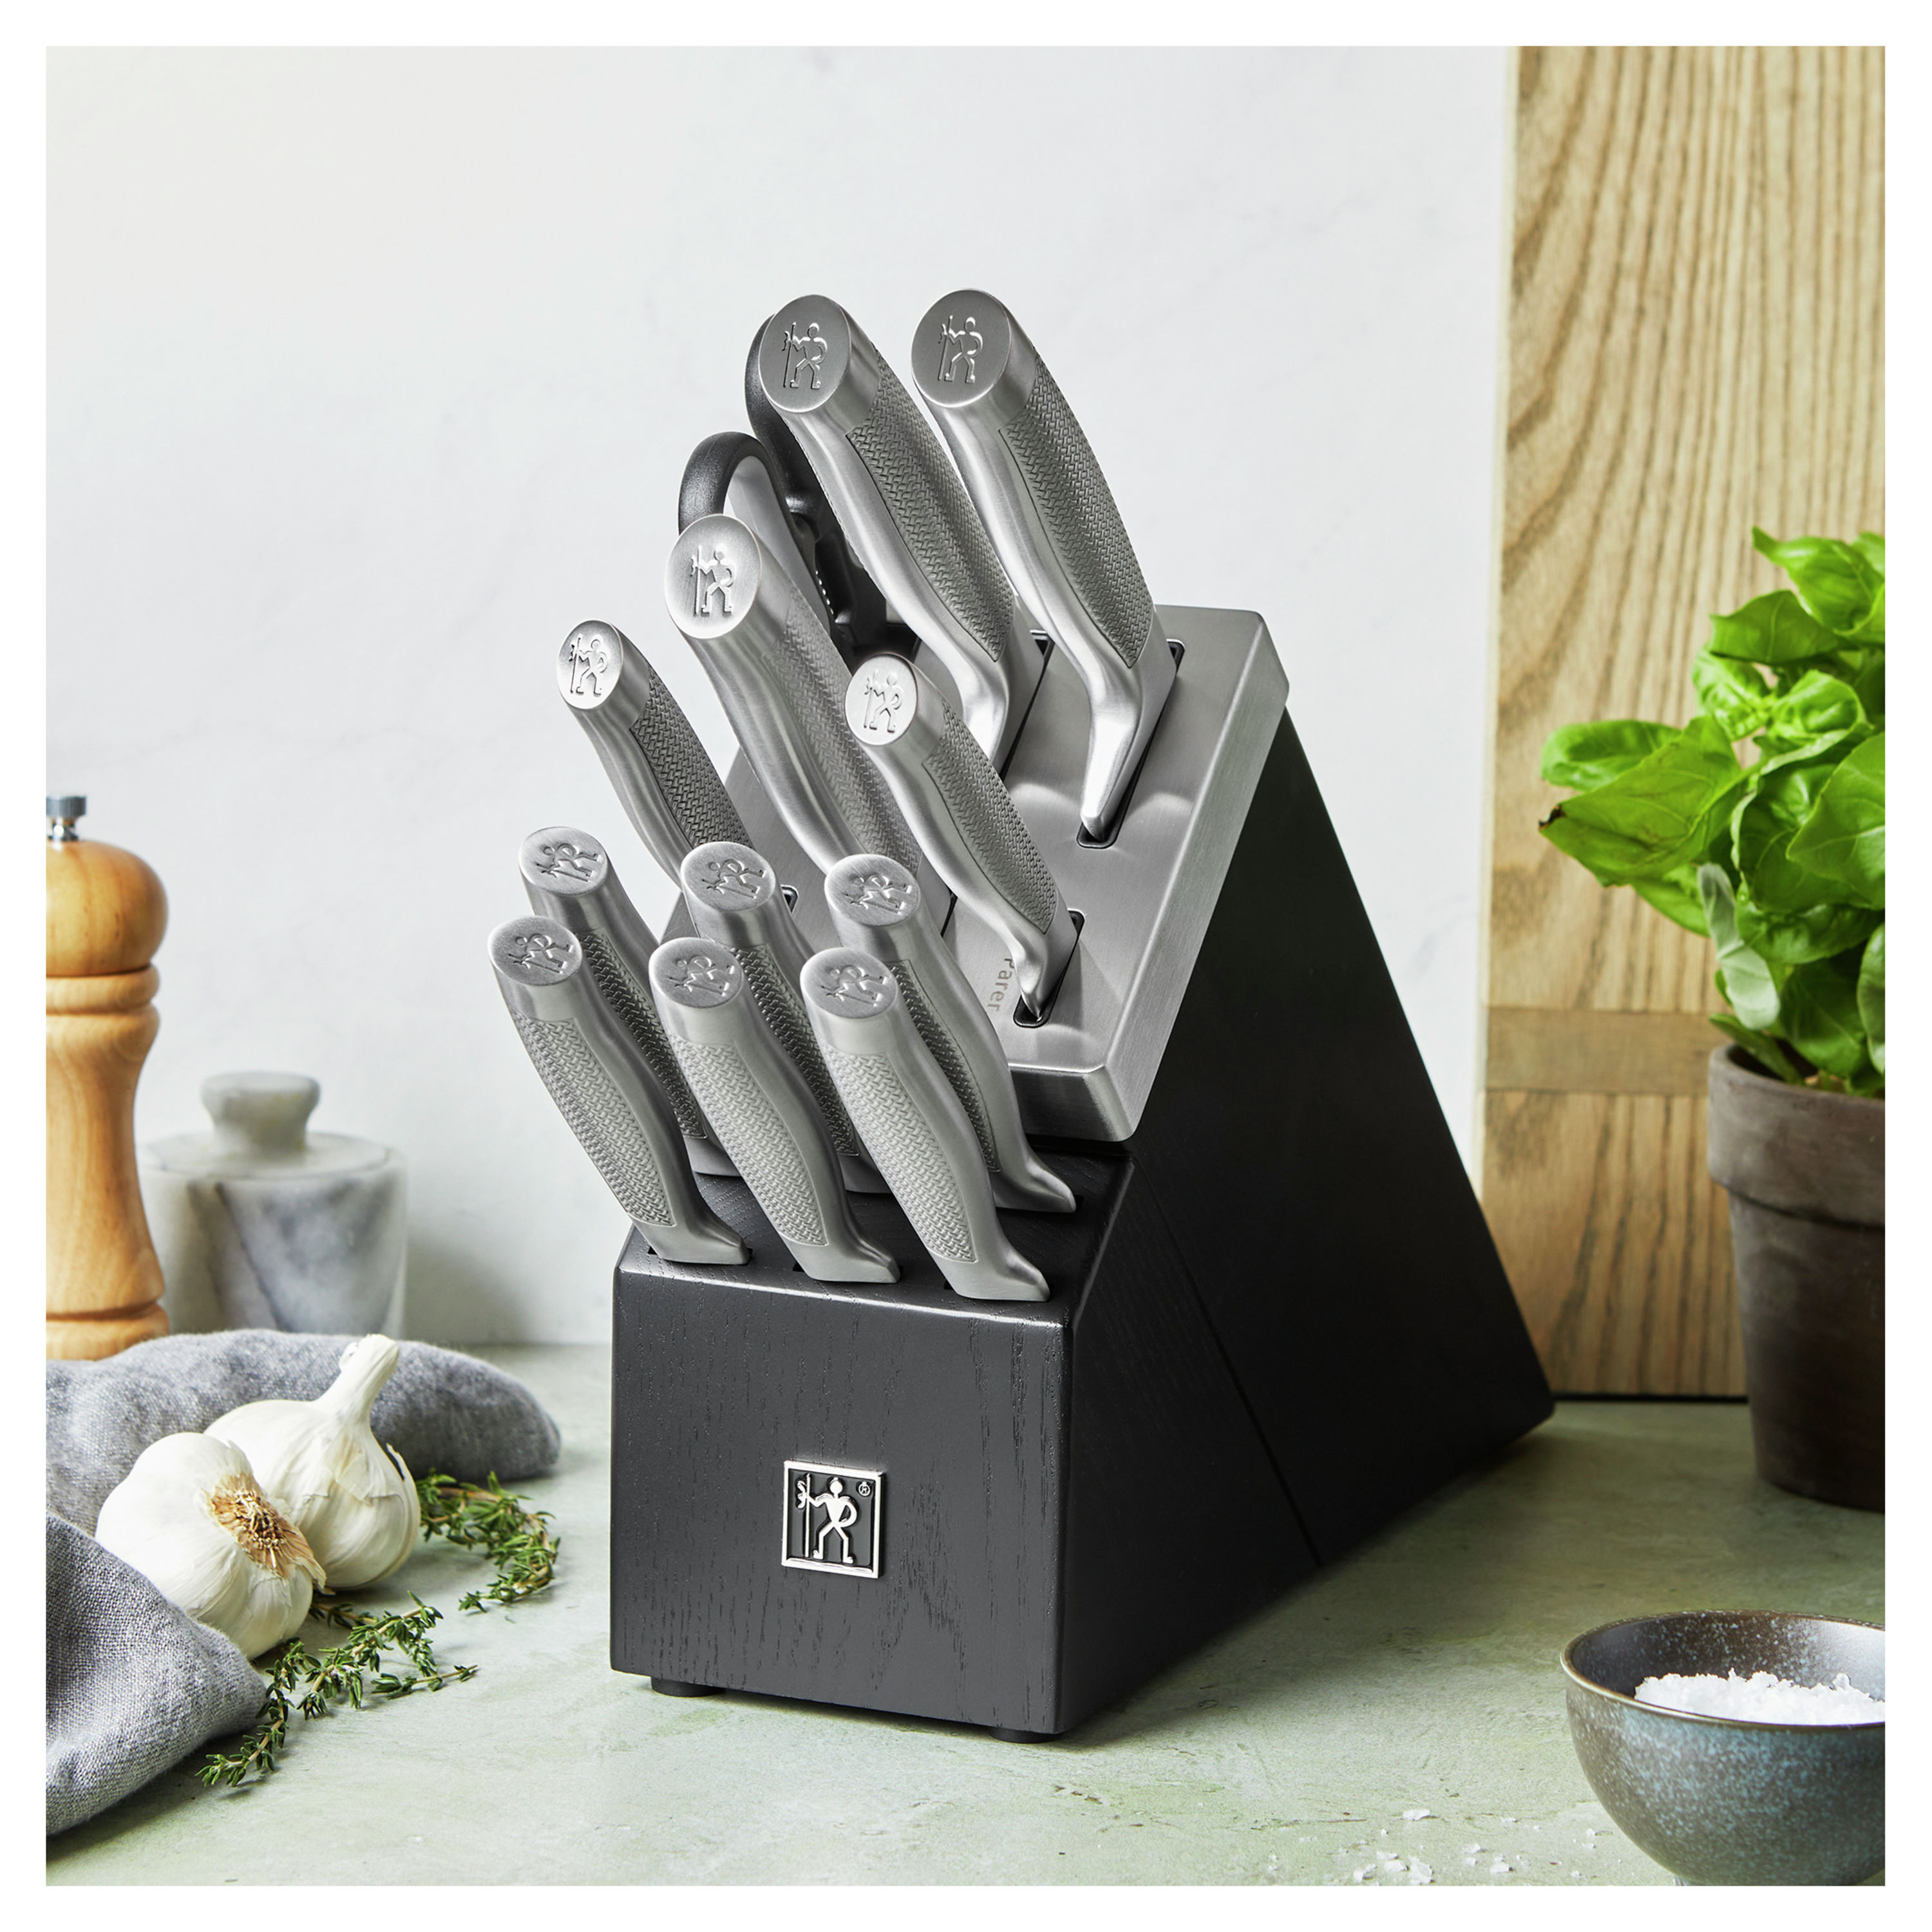 Save $457 on This Henckels Self-Sharpening Knife Set That 'Can Cut